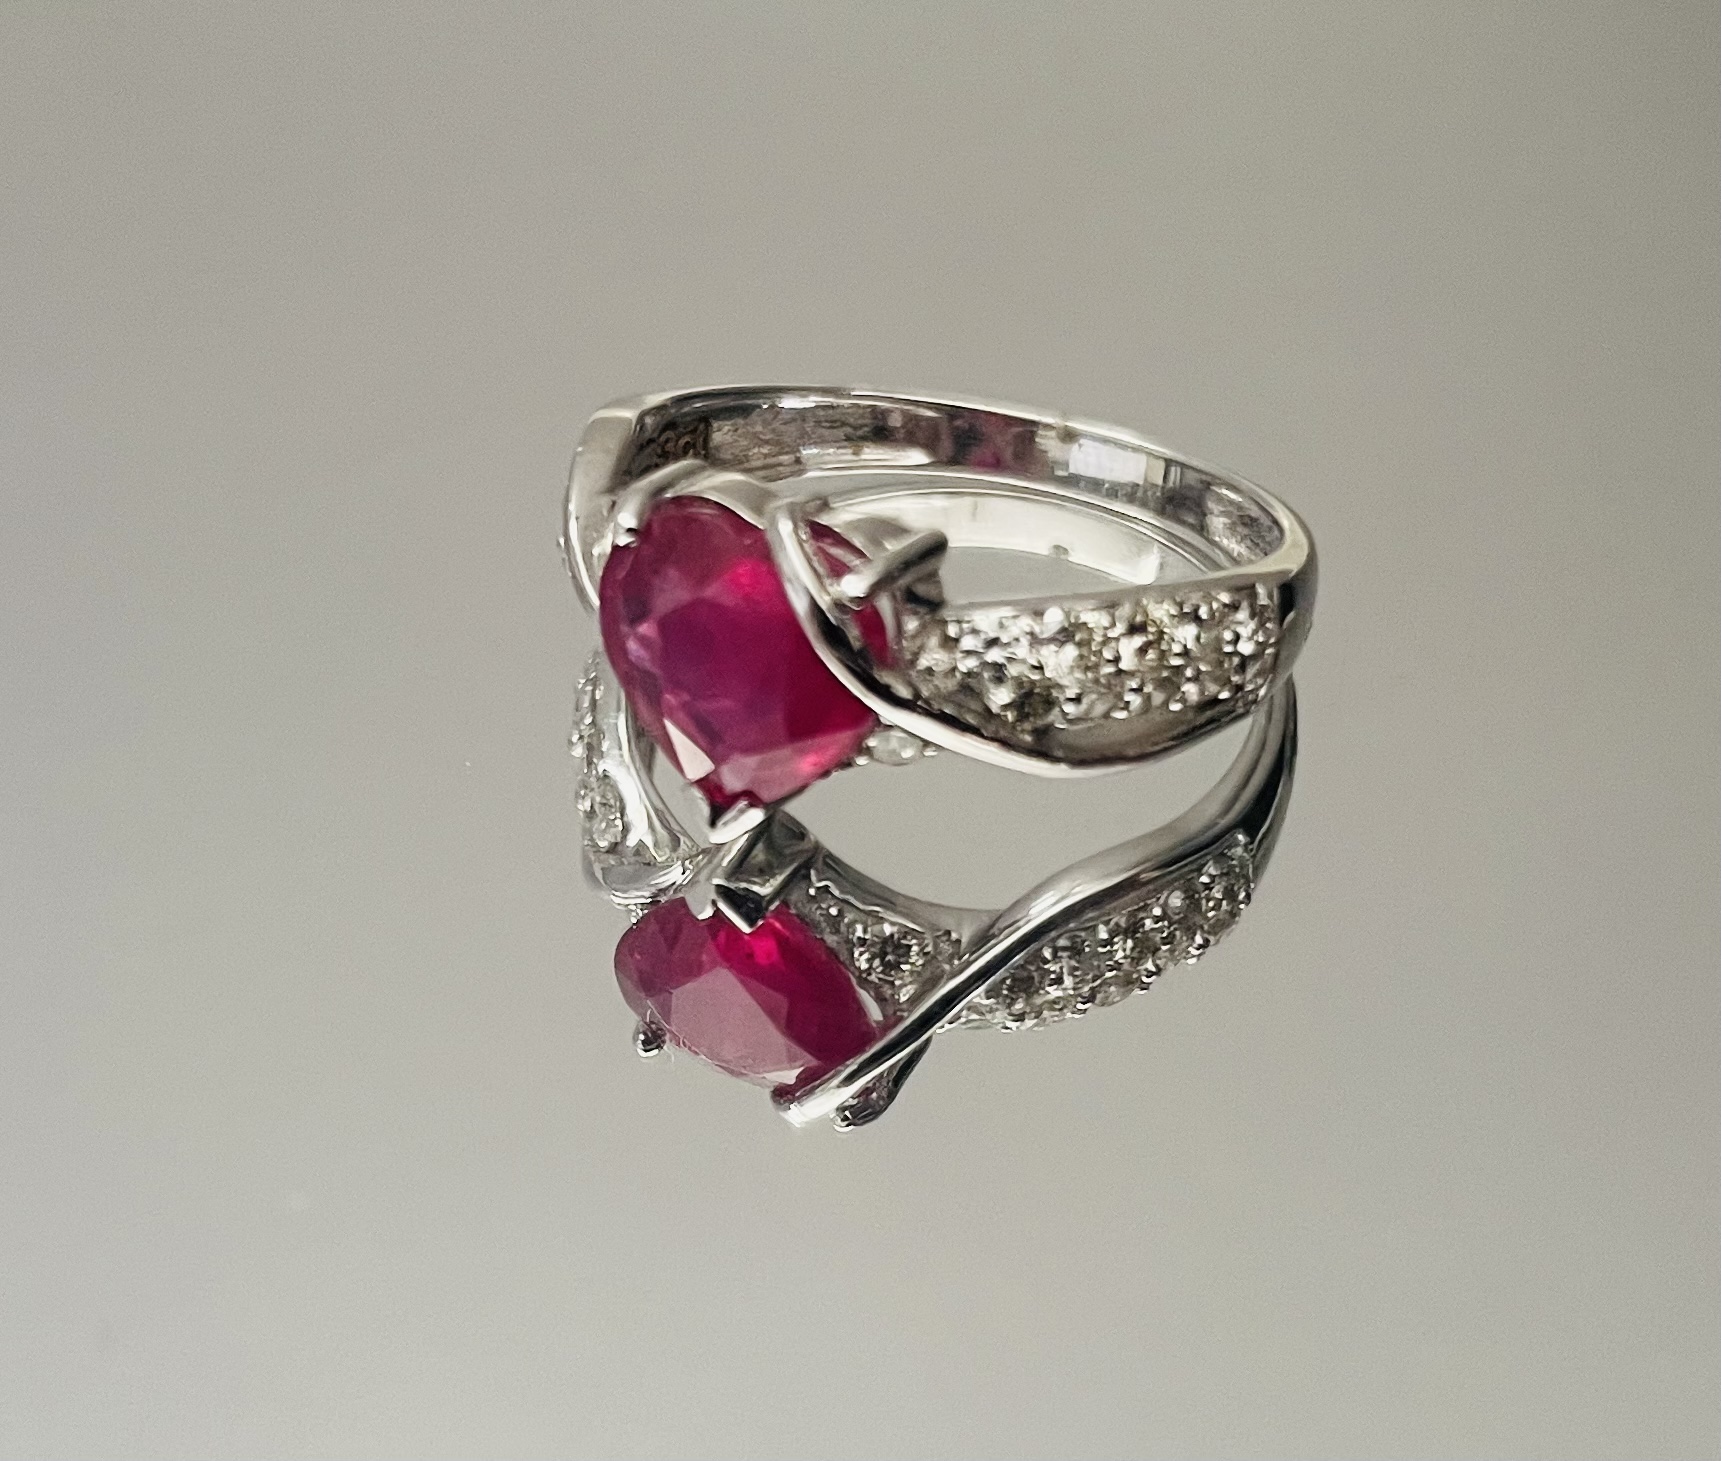 Beautiful Natural Heart Shape Burmese Ruby Ring 1.58 Ct With Diamonds & 18kGold - Image 4 of 7